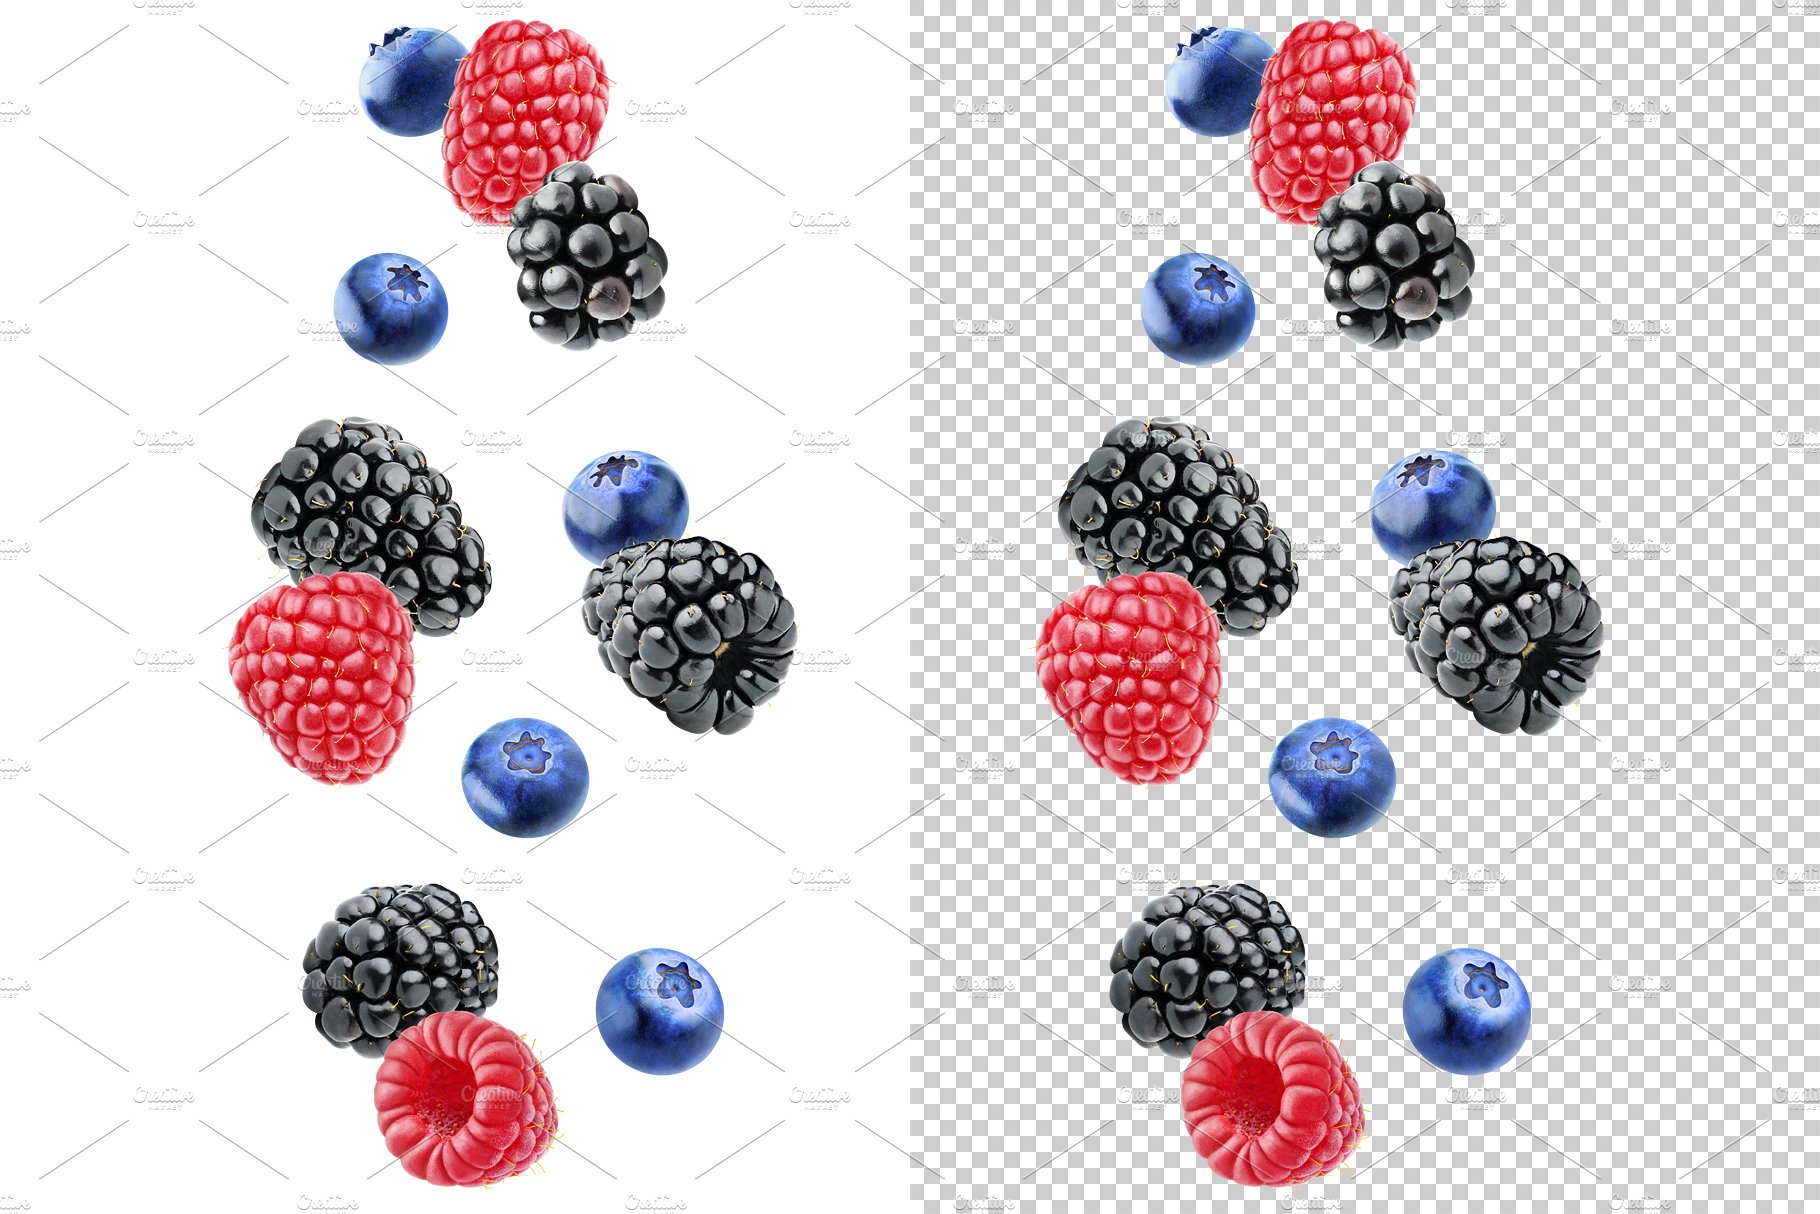 Berries in the air preview image.